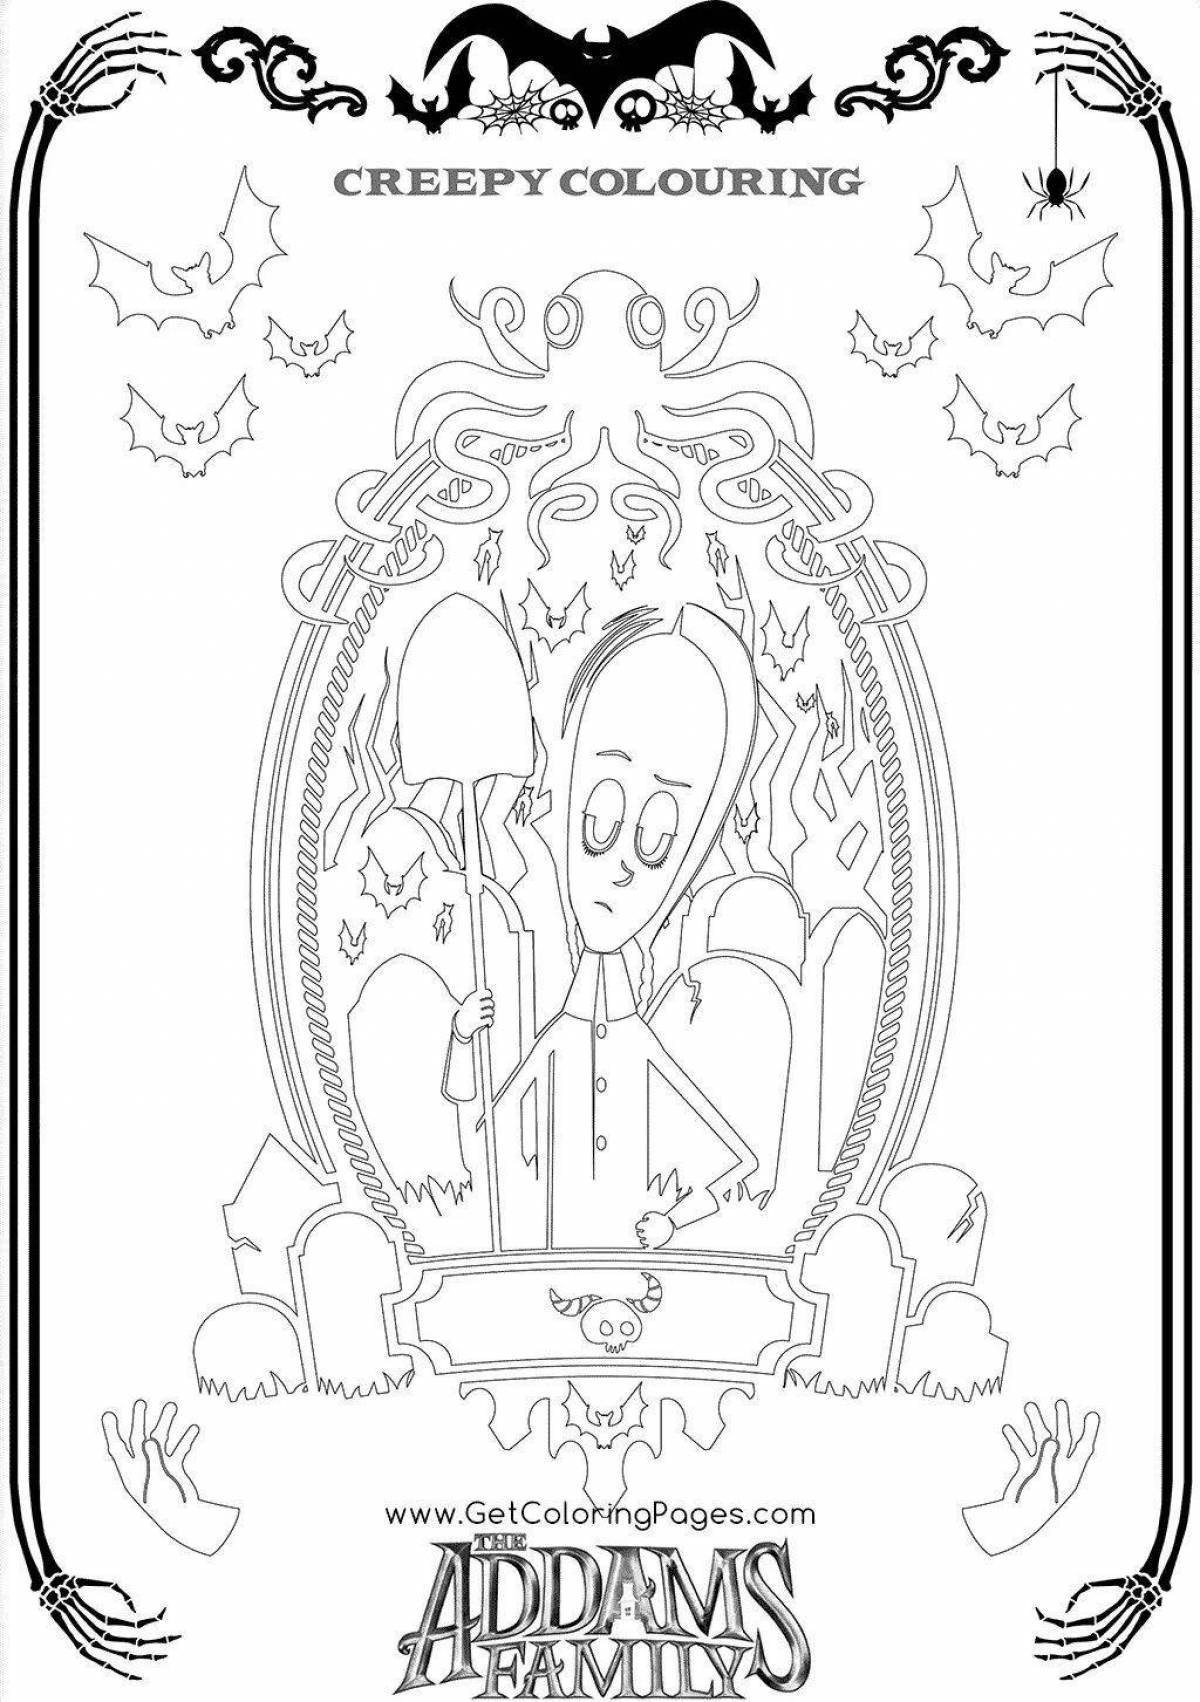 Fabulous Addams Family coloring pages for kids